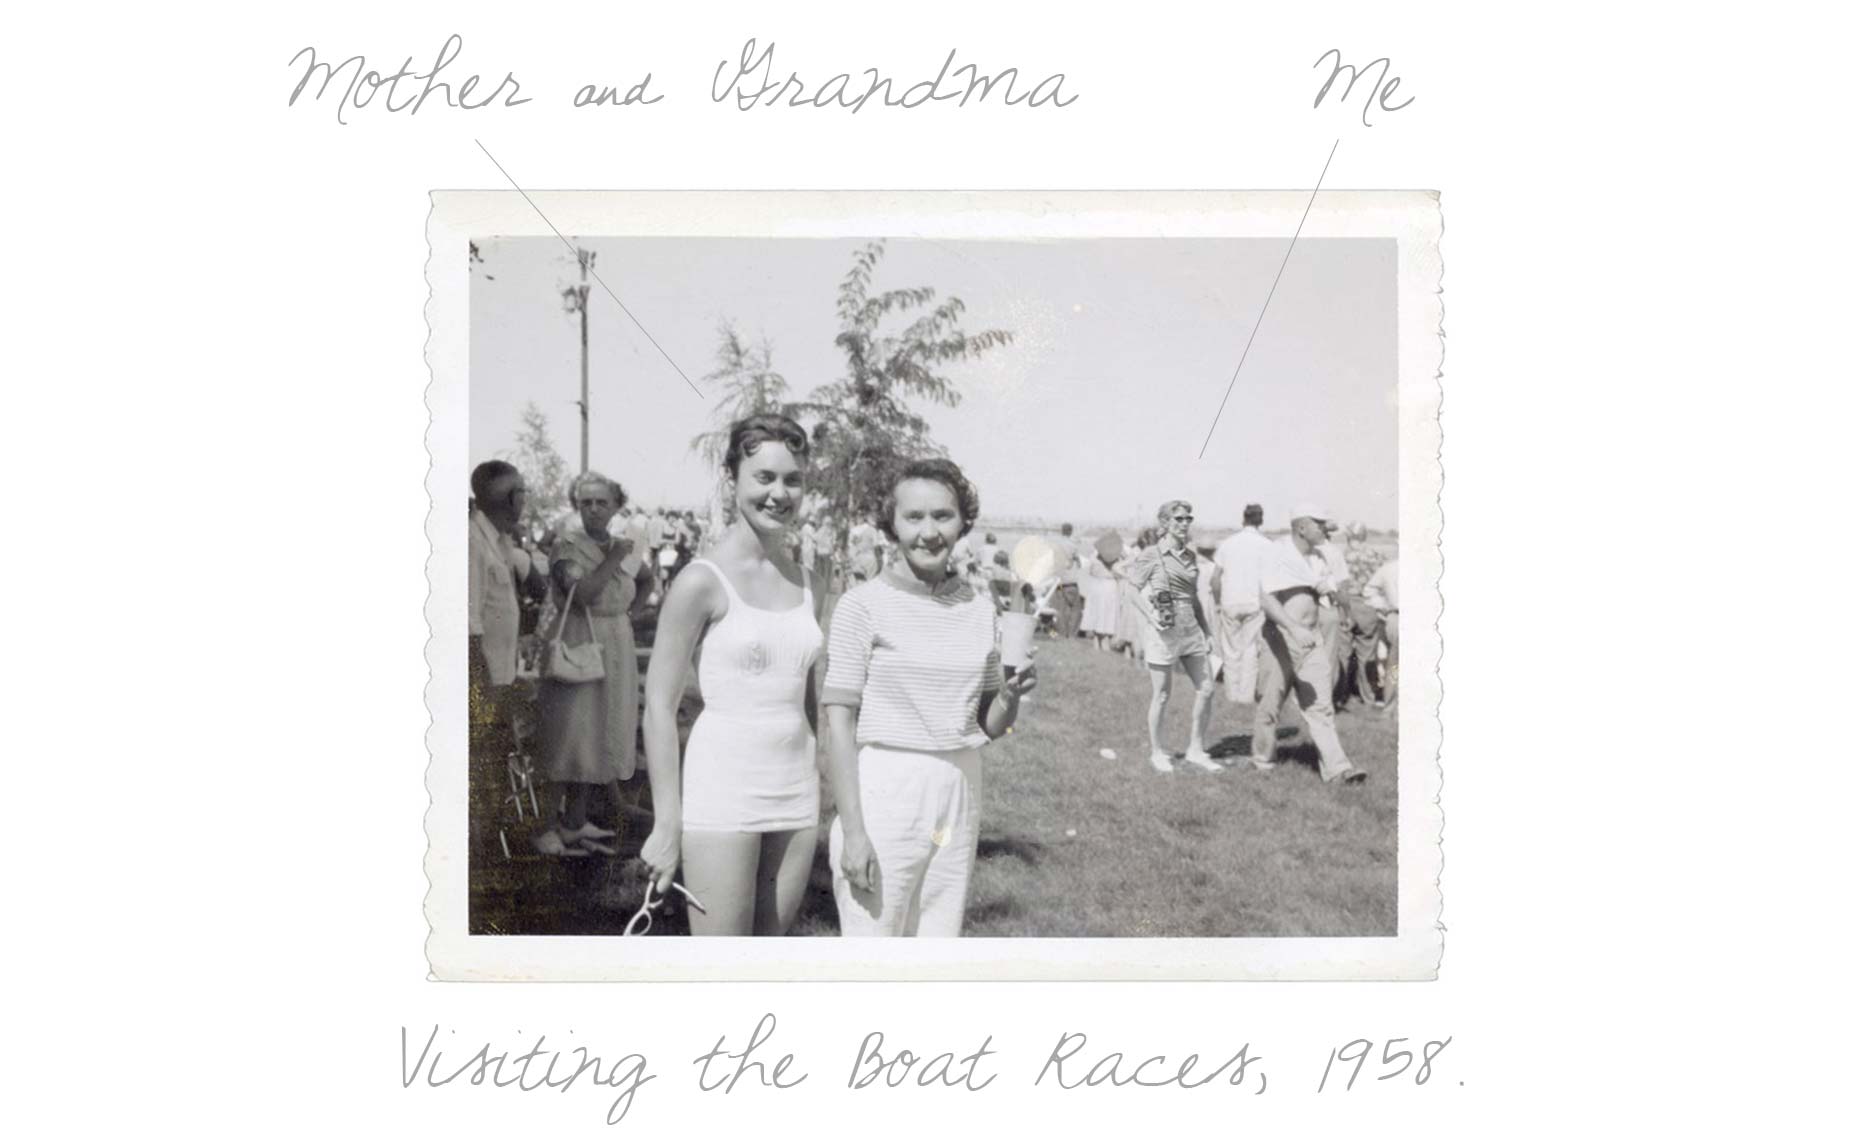 Visiting Columbia Cup Boat Races, 1958